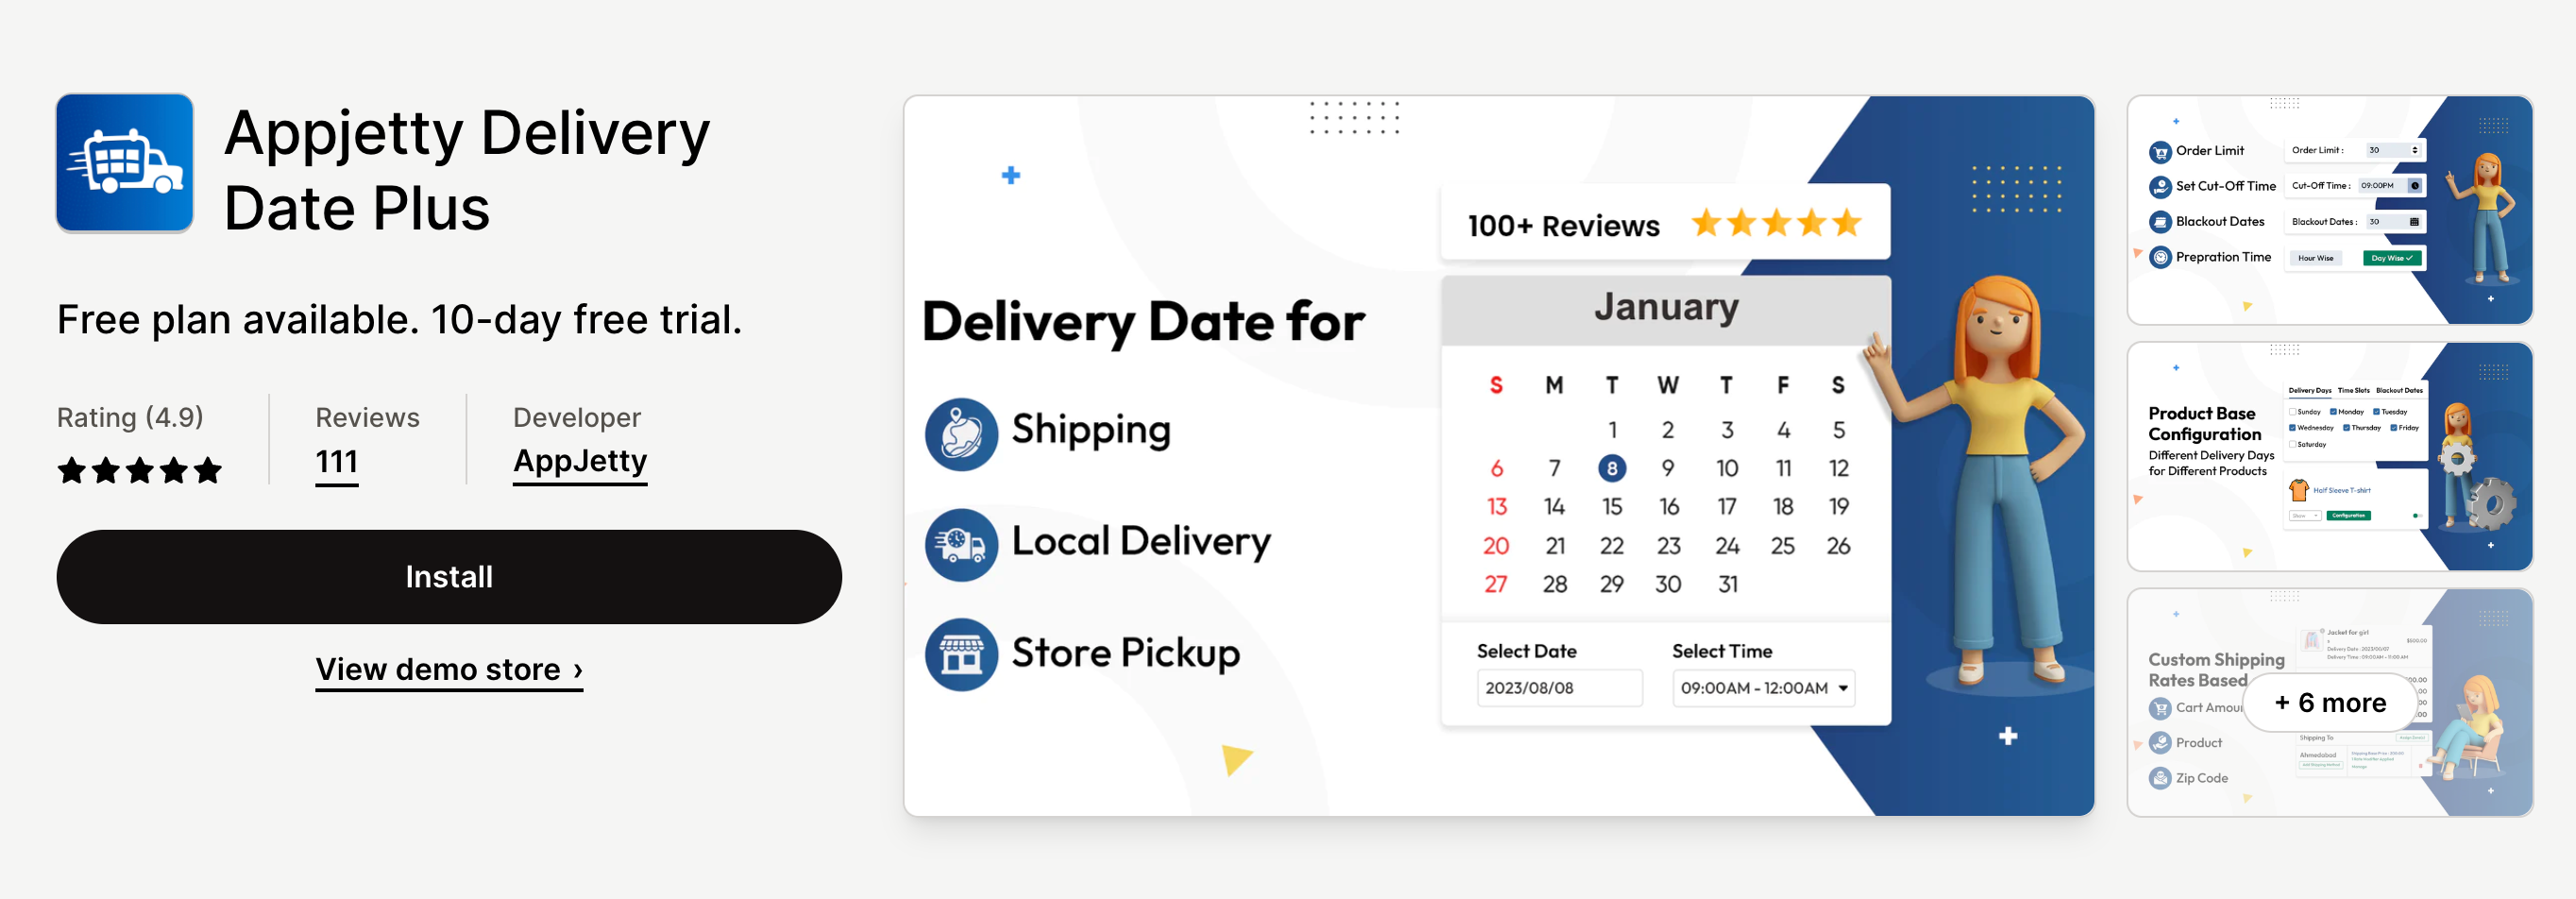 Appjetty Delivery Date Plus